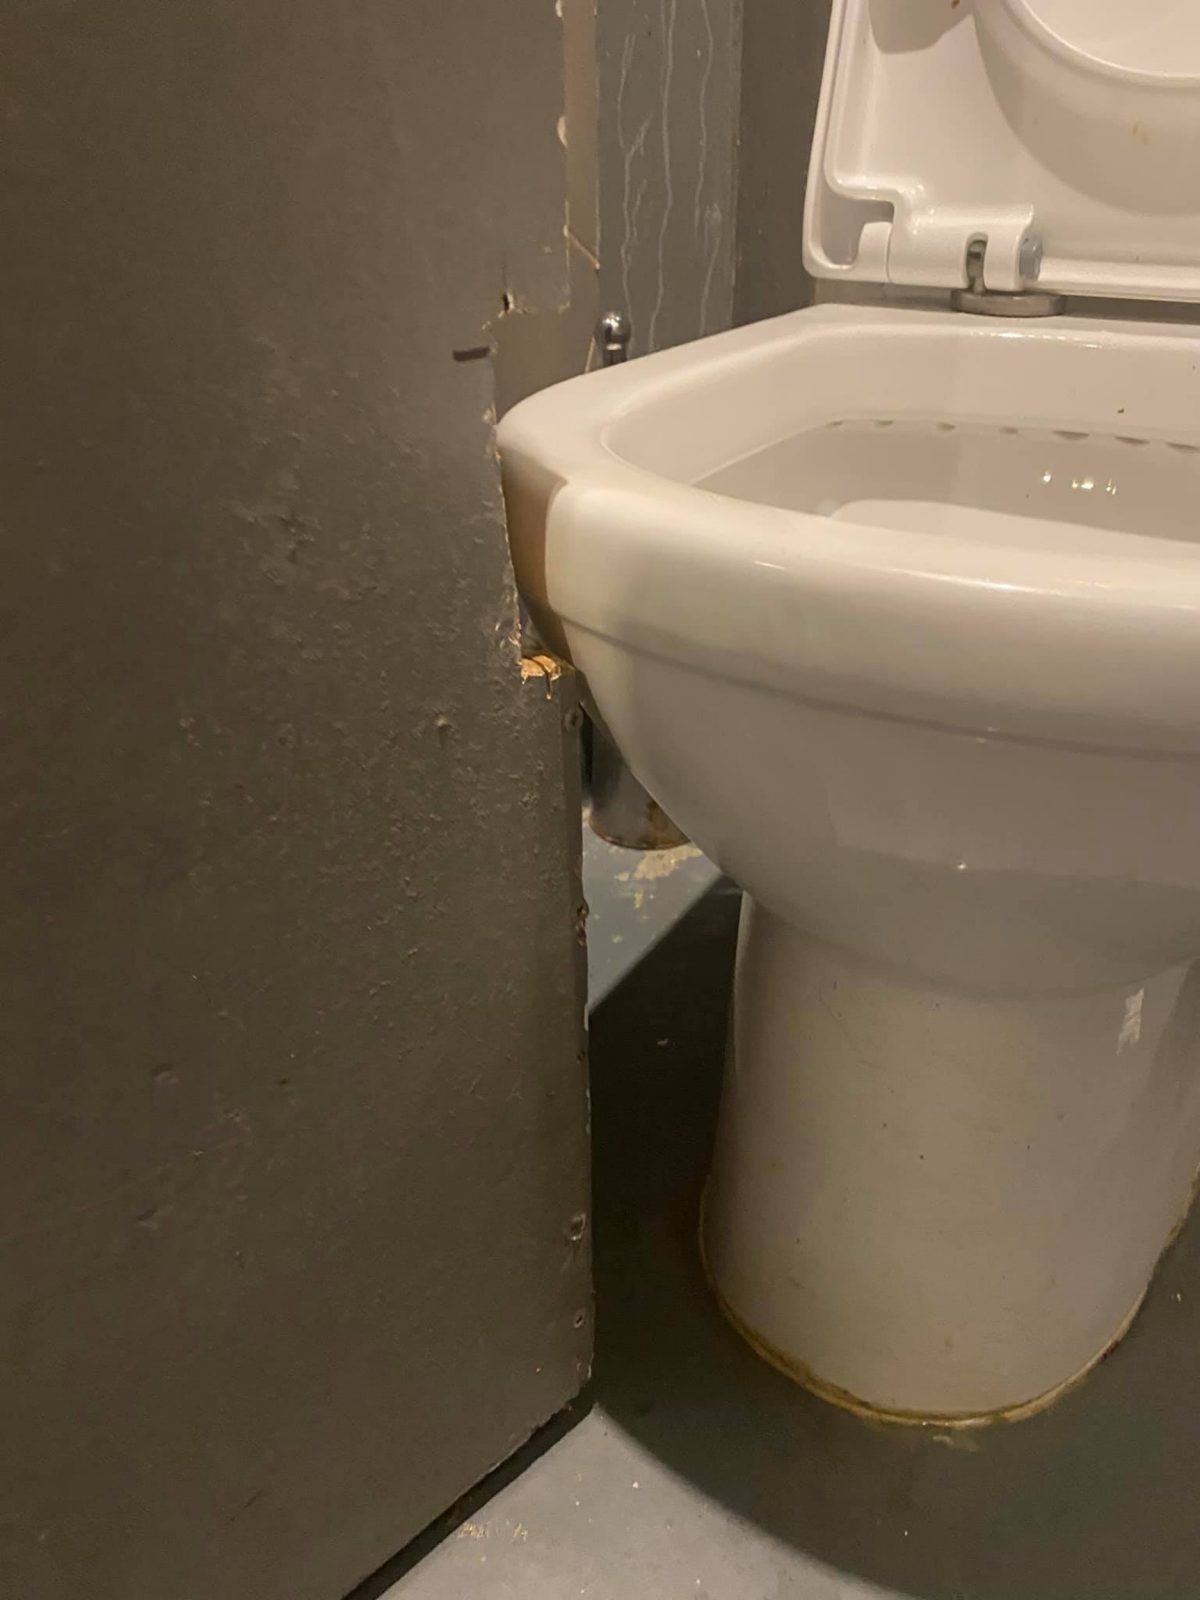 The cramped toilet